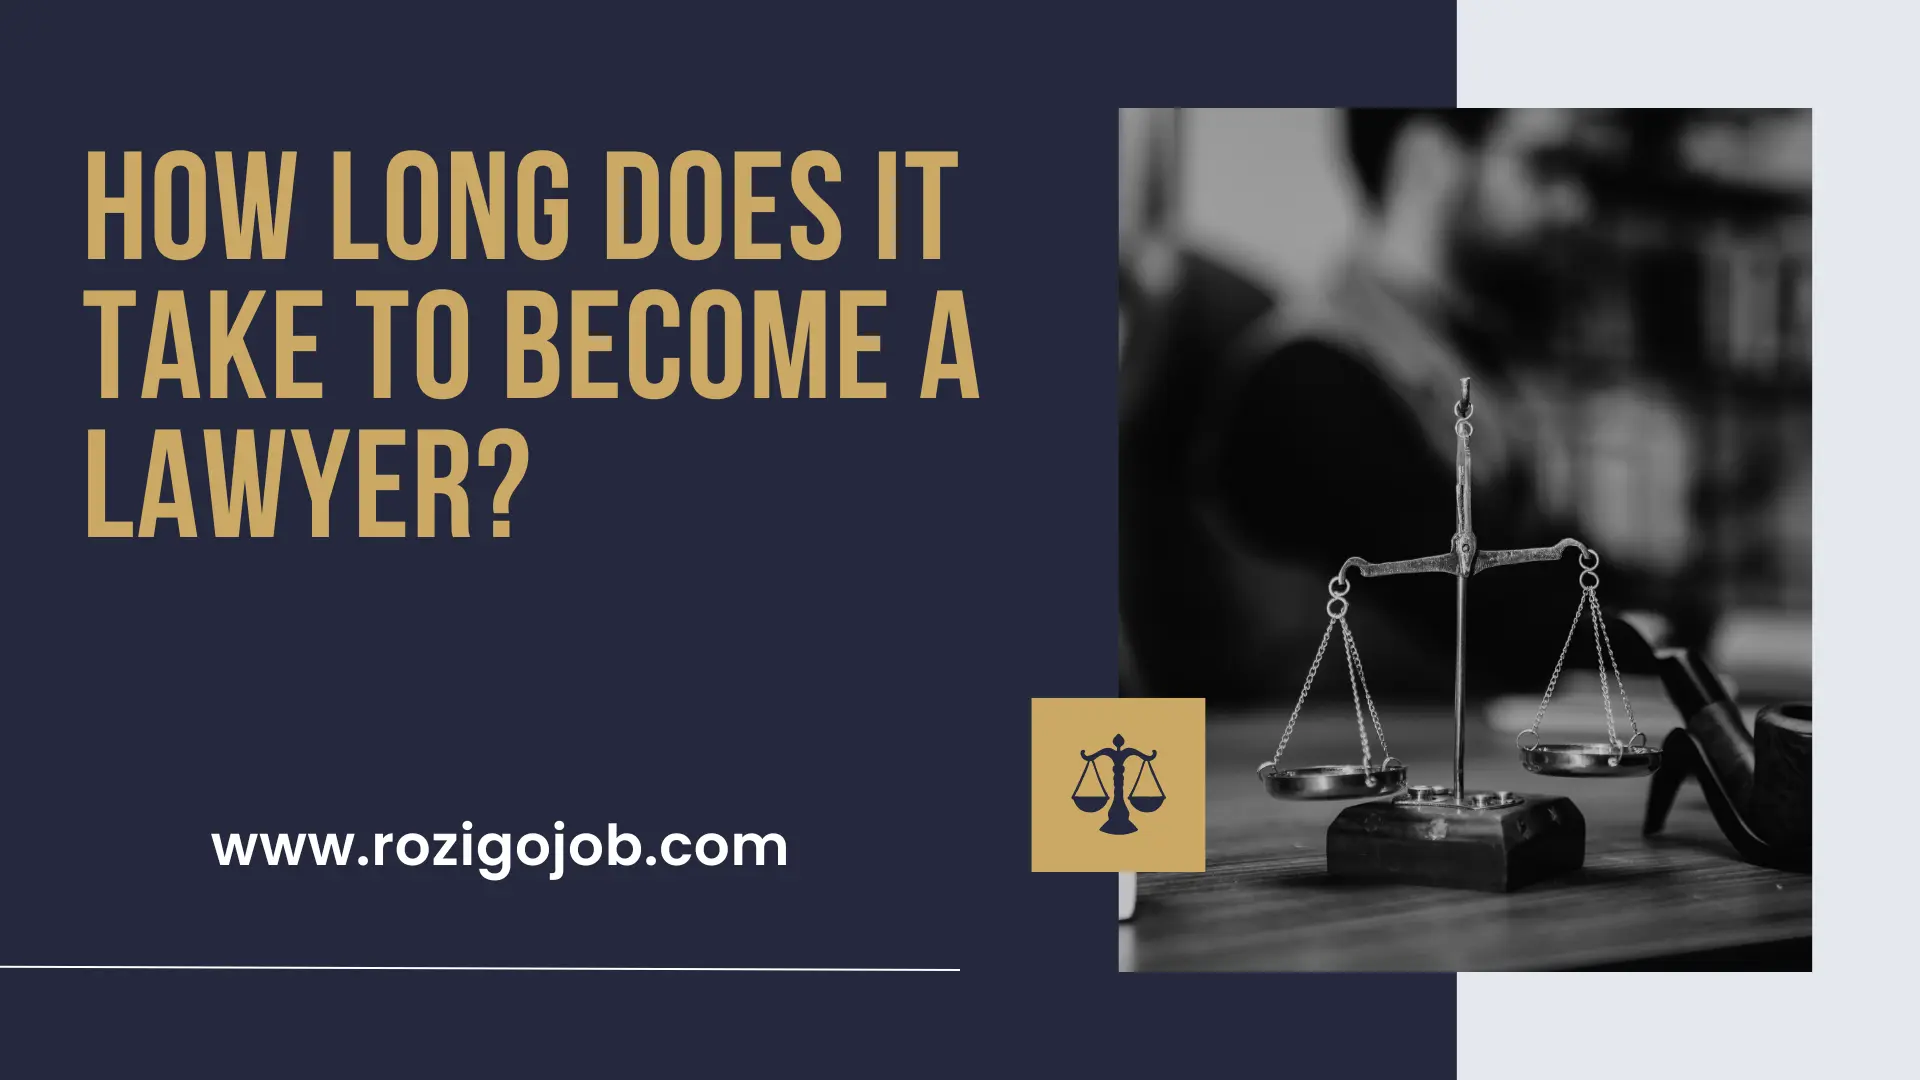 How Long Does It Take to Become a Lawyer